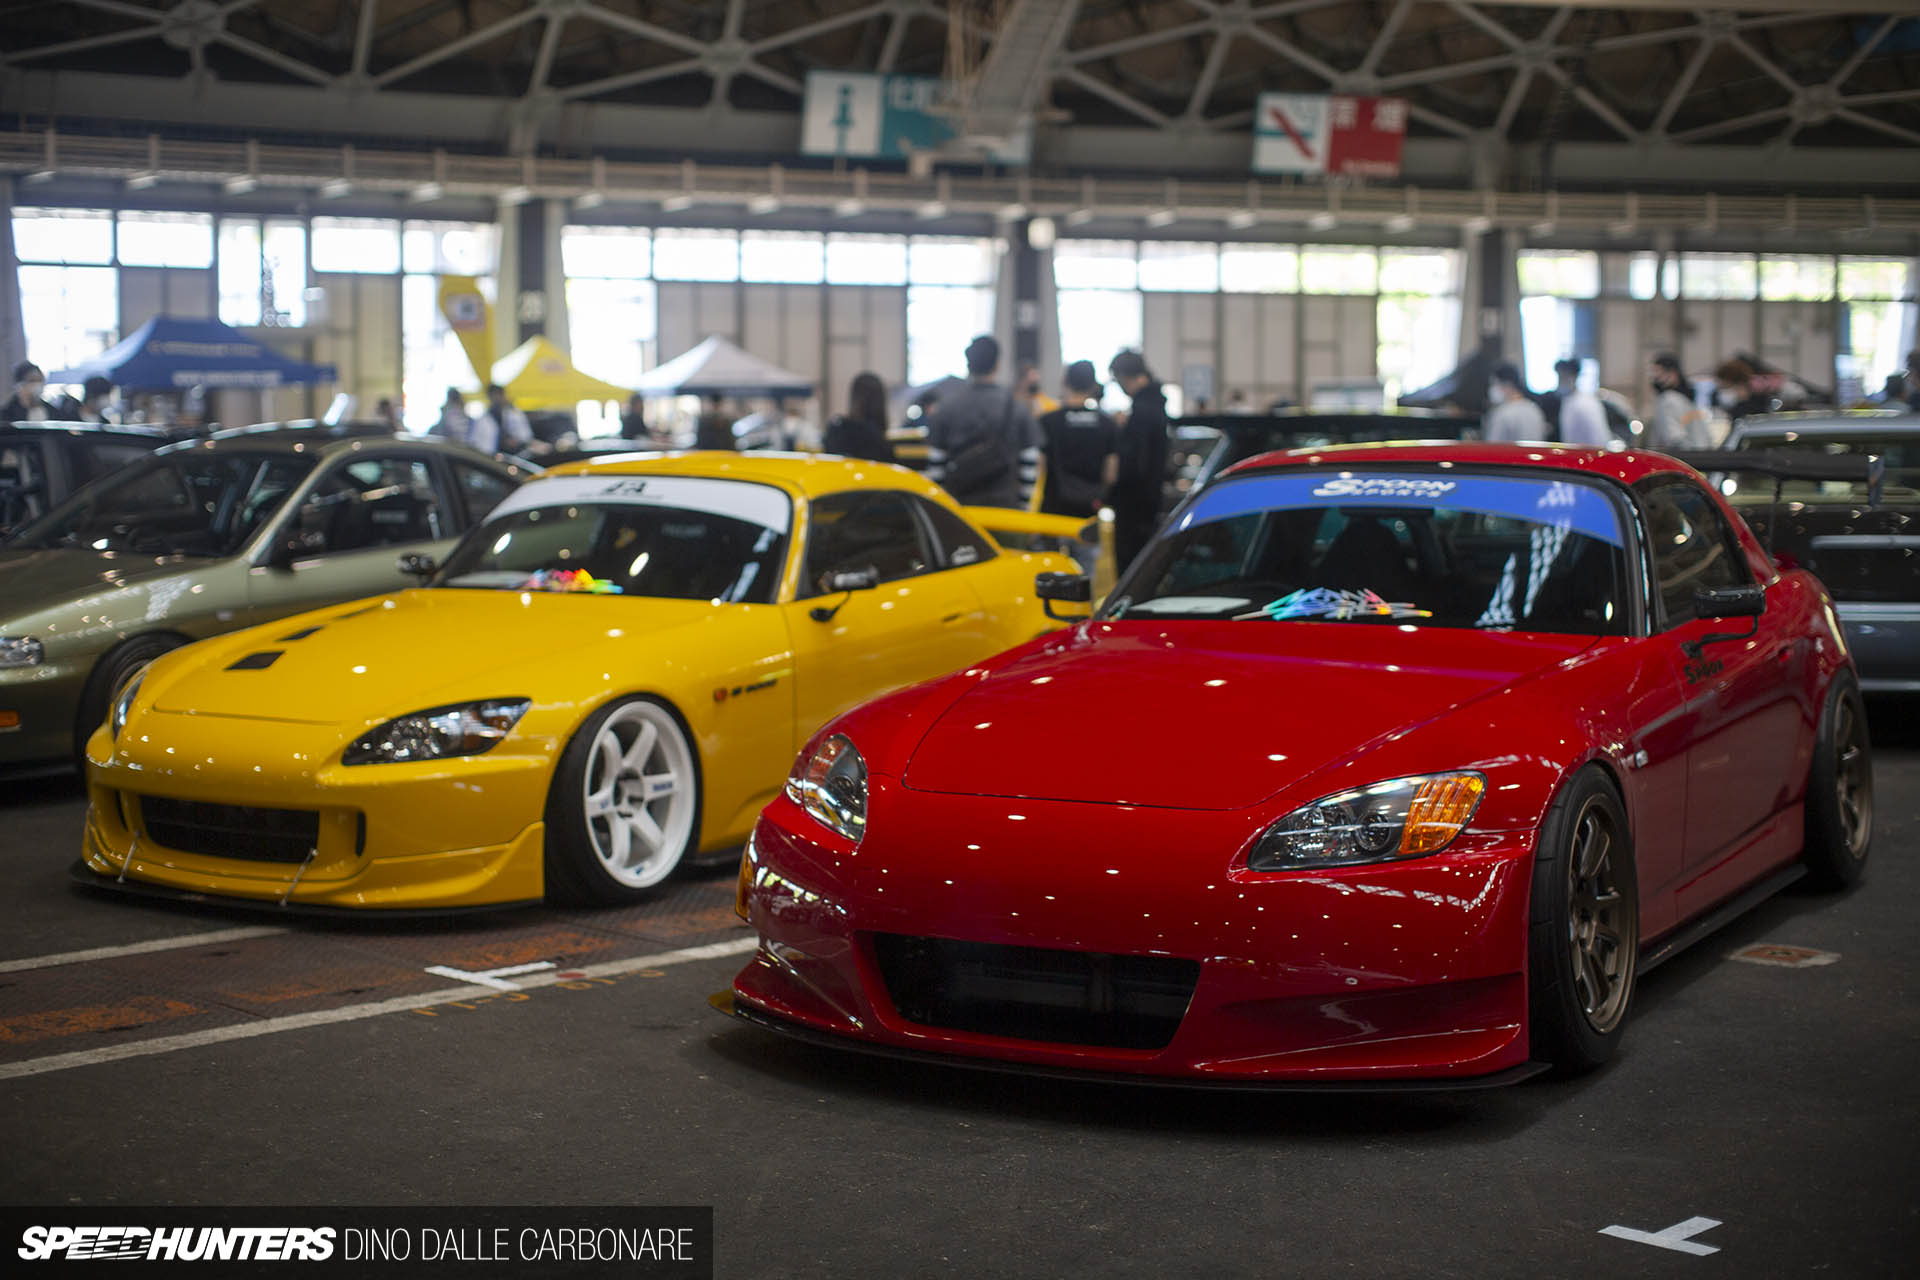 111 Images From Wekfest Japan